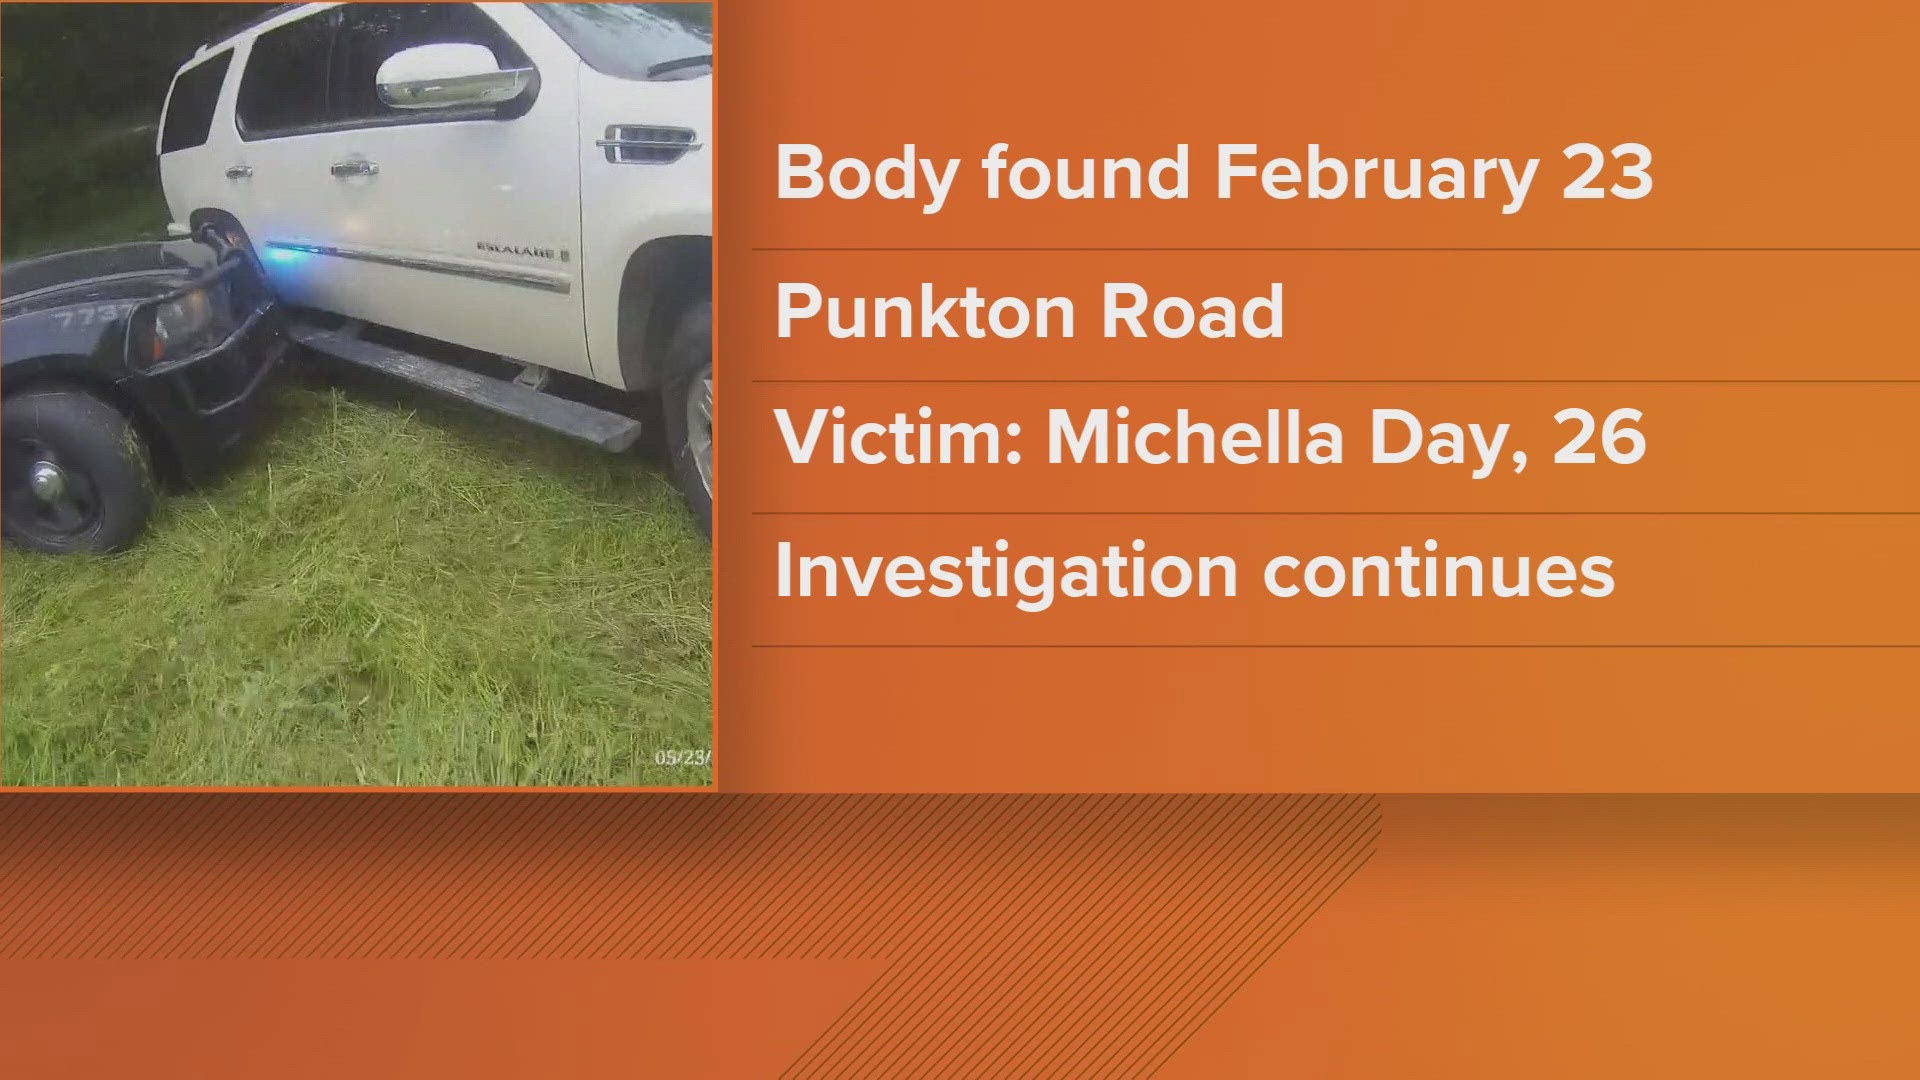 The woman was later identified as Michella Day. Her body was found down an embankment off Punkton Road in Del Rio in early March.